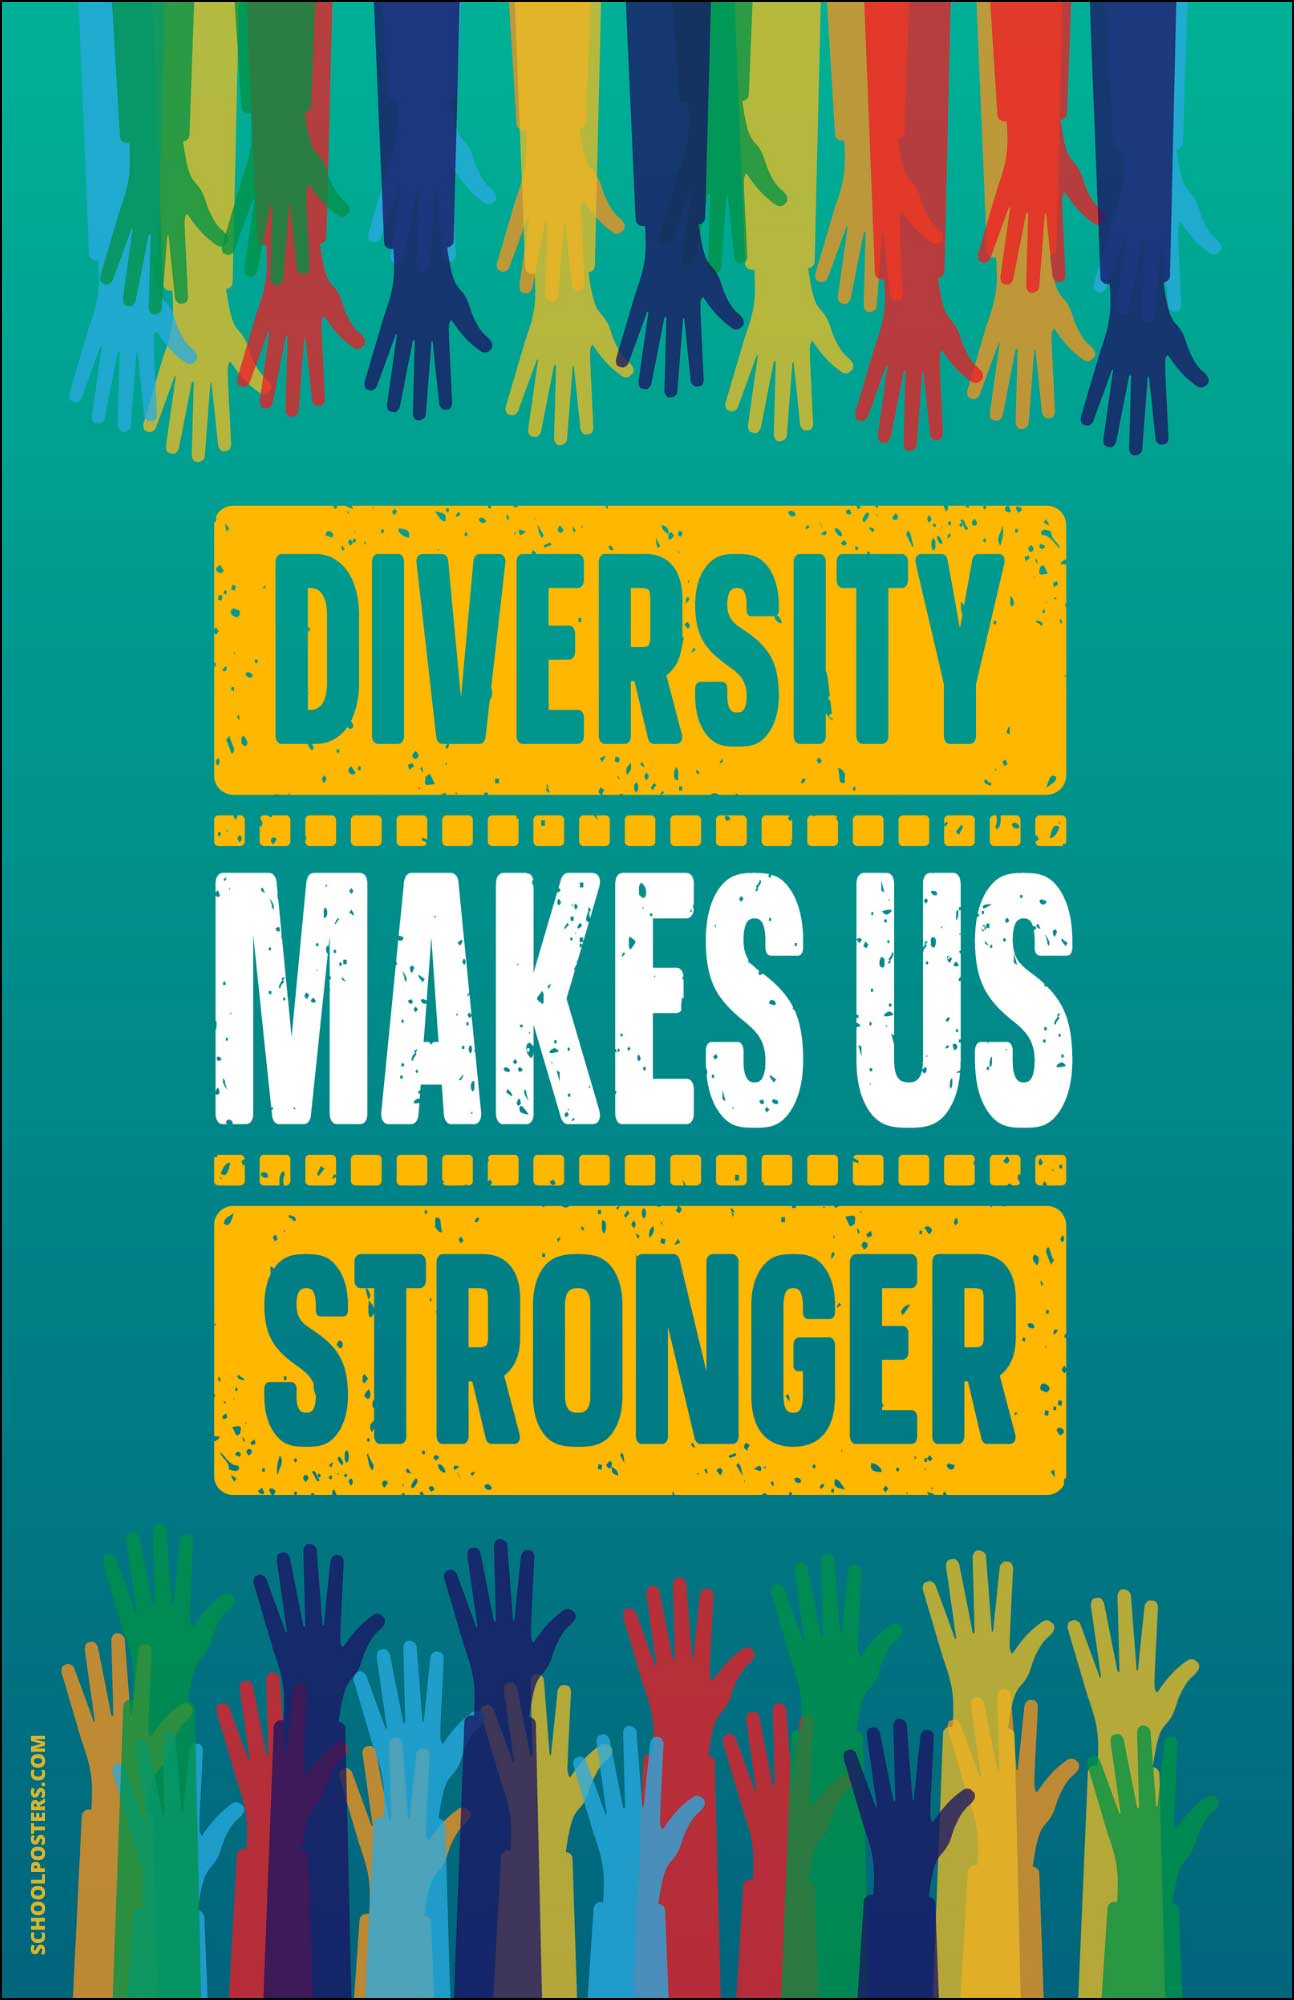 Diversity, Equity, and Inclusion Poster